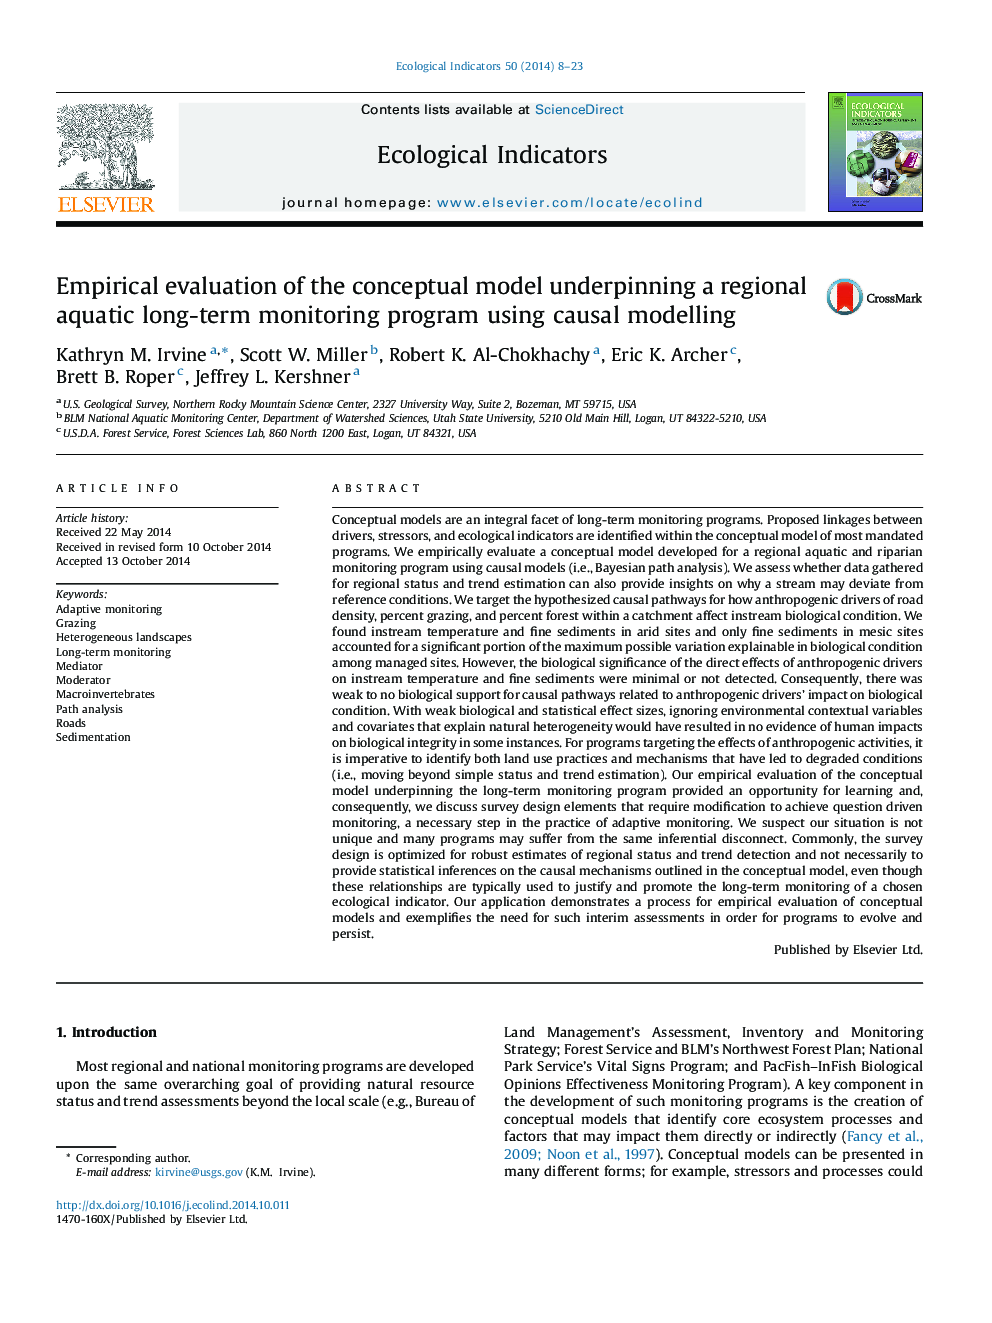 Empirical evaluation of the conceptual model underpinning a regional aquatic long-term monitoring program using causal modelling